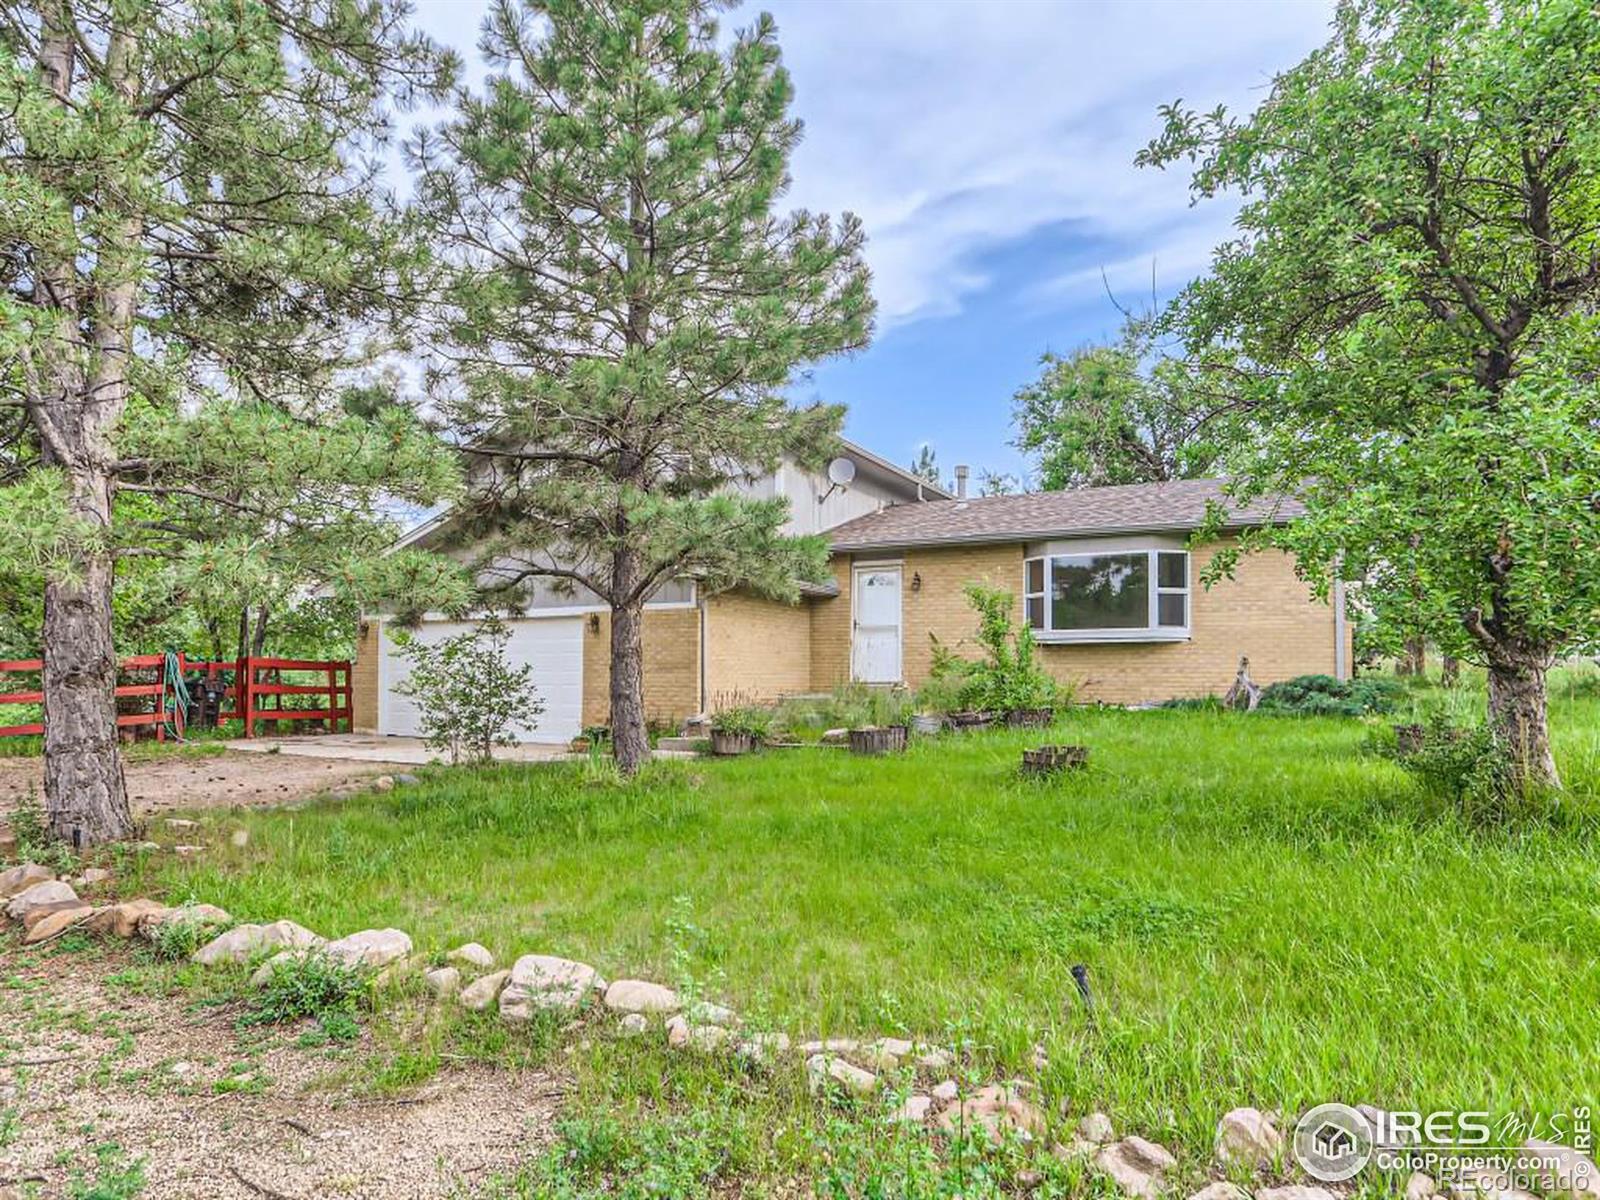 6314  corinth road, longmont sold home. Closed on 2024-04-08 for $850,000.